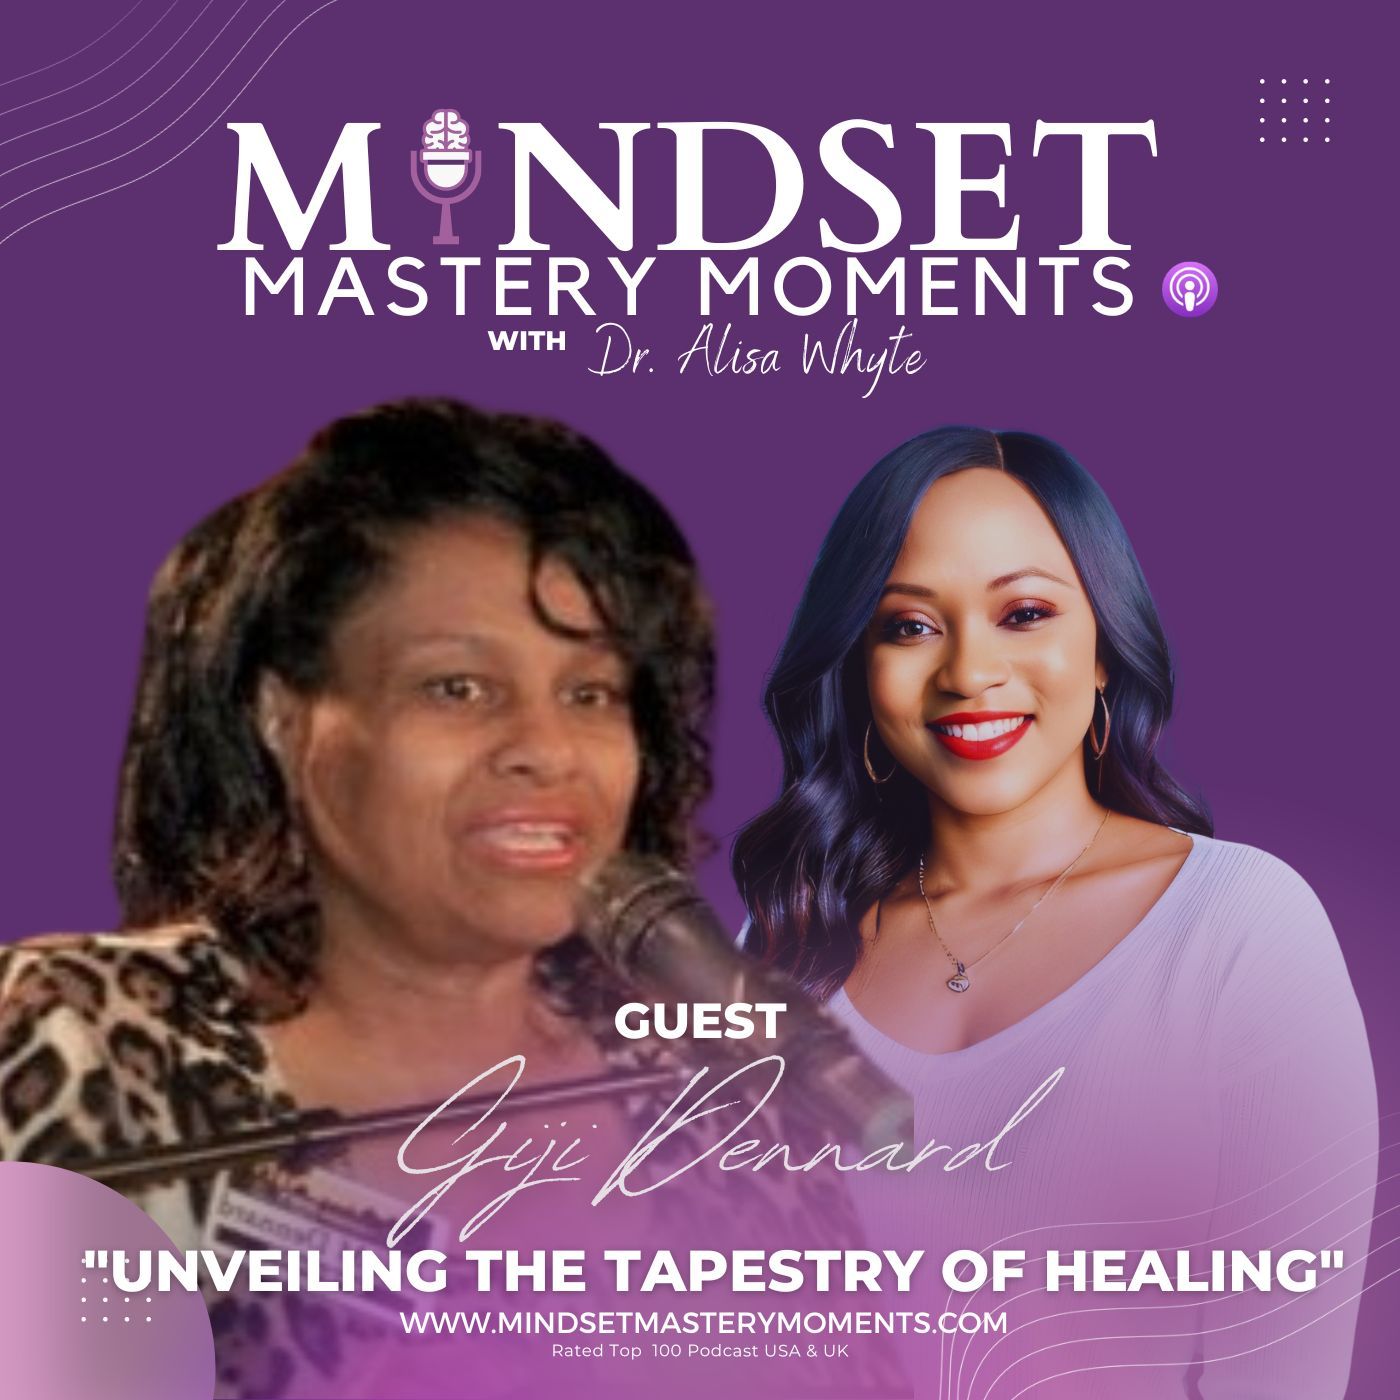 "Unveiling the Tapestry of Healing” with Giji Mischel Dennard - Part 1